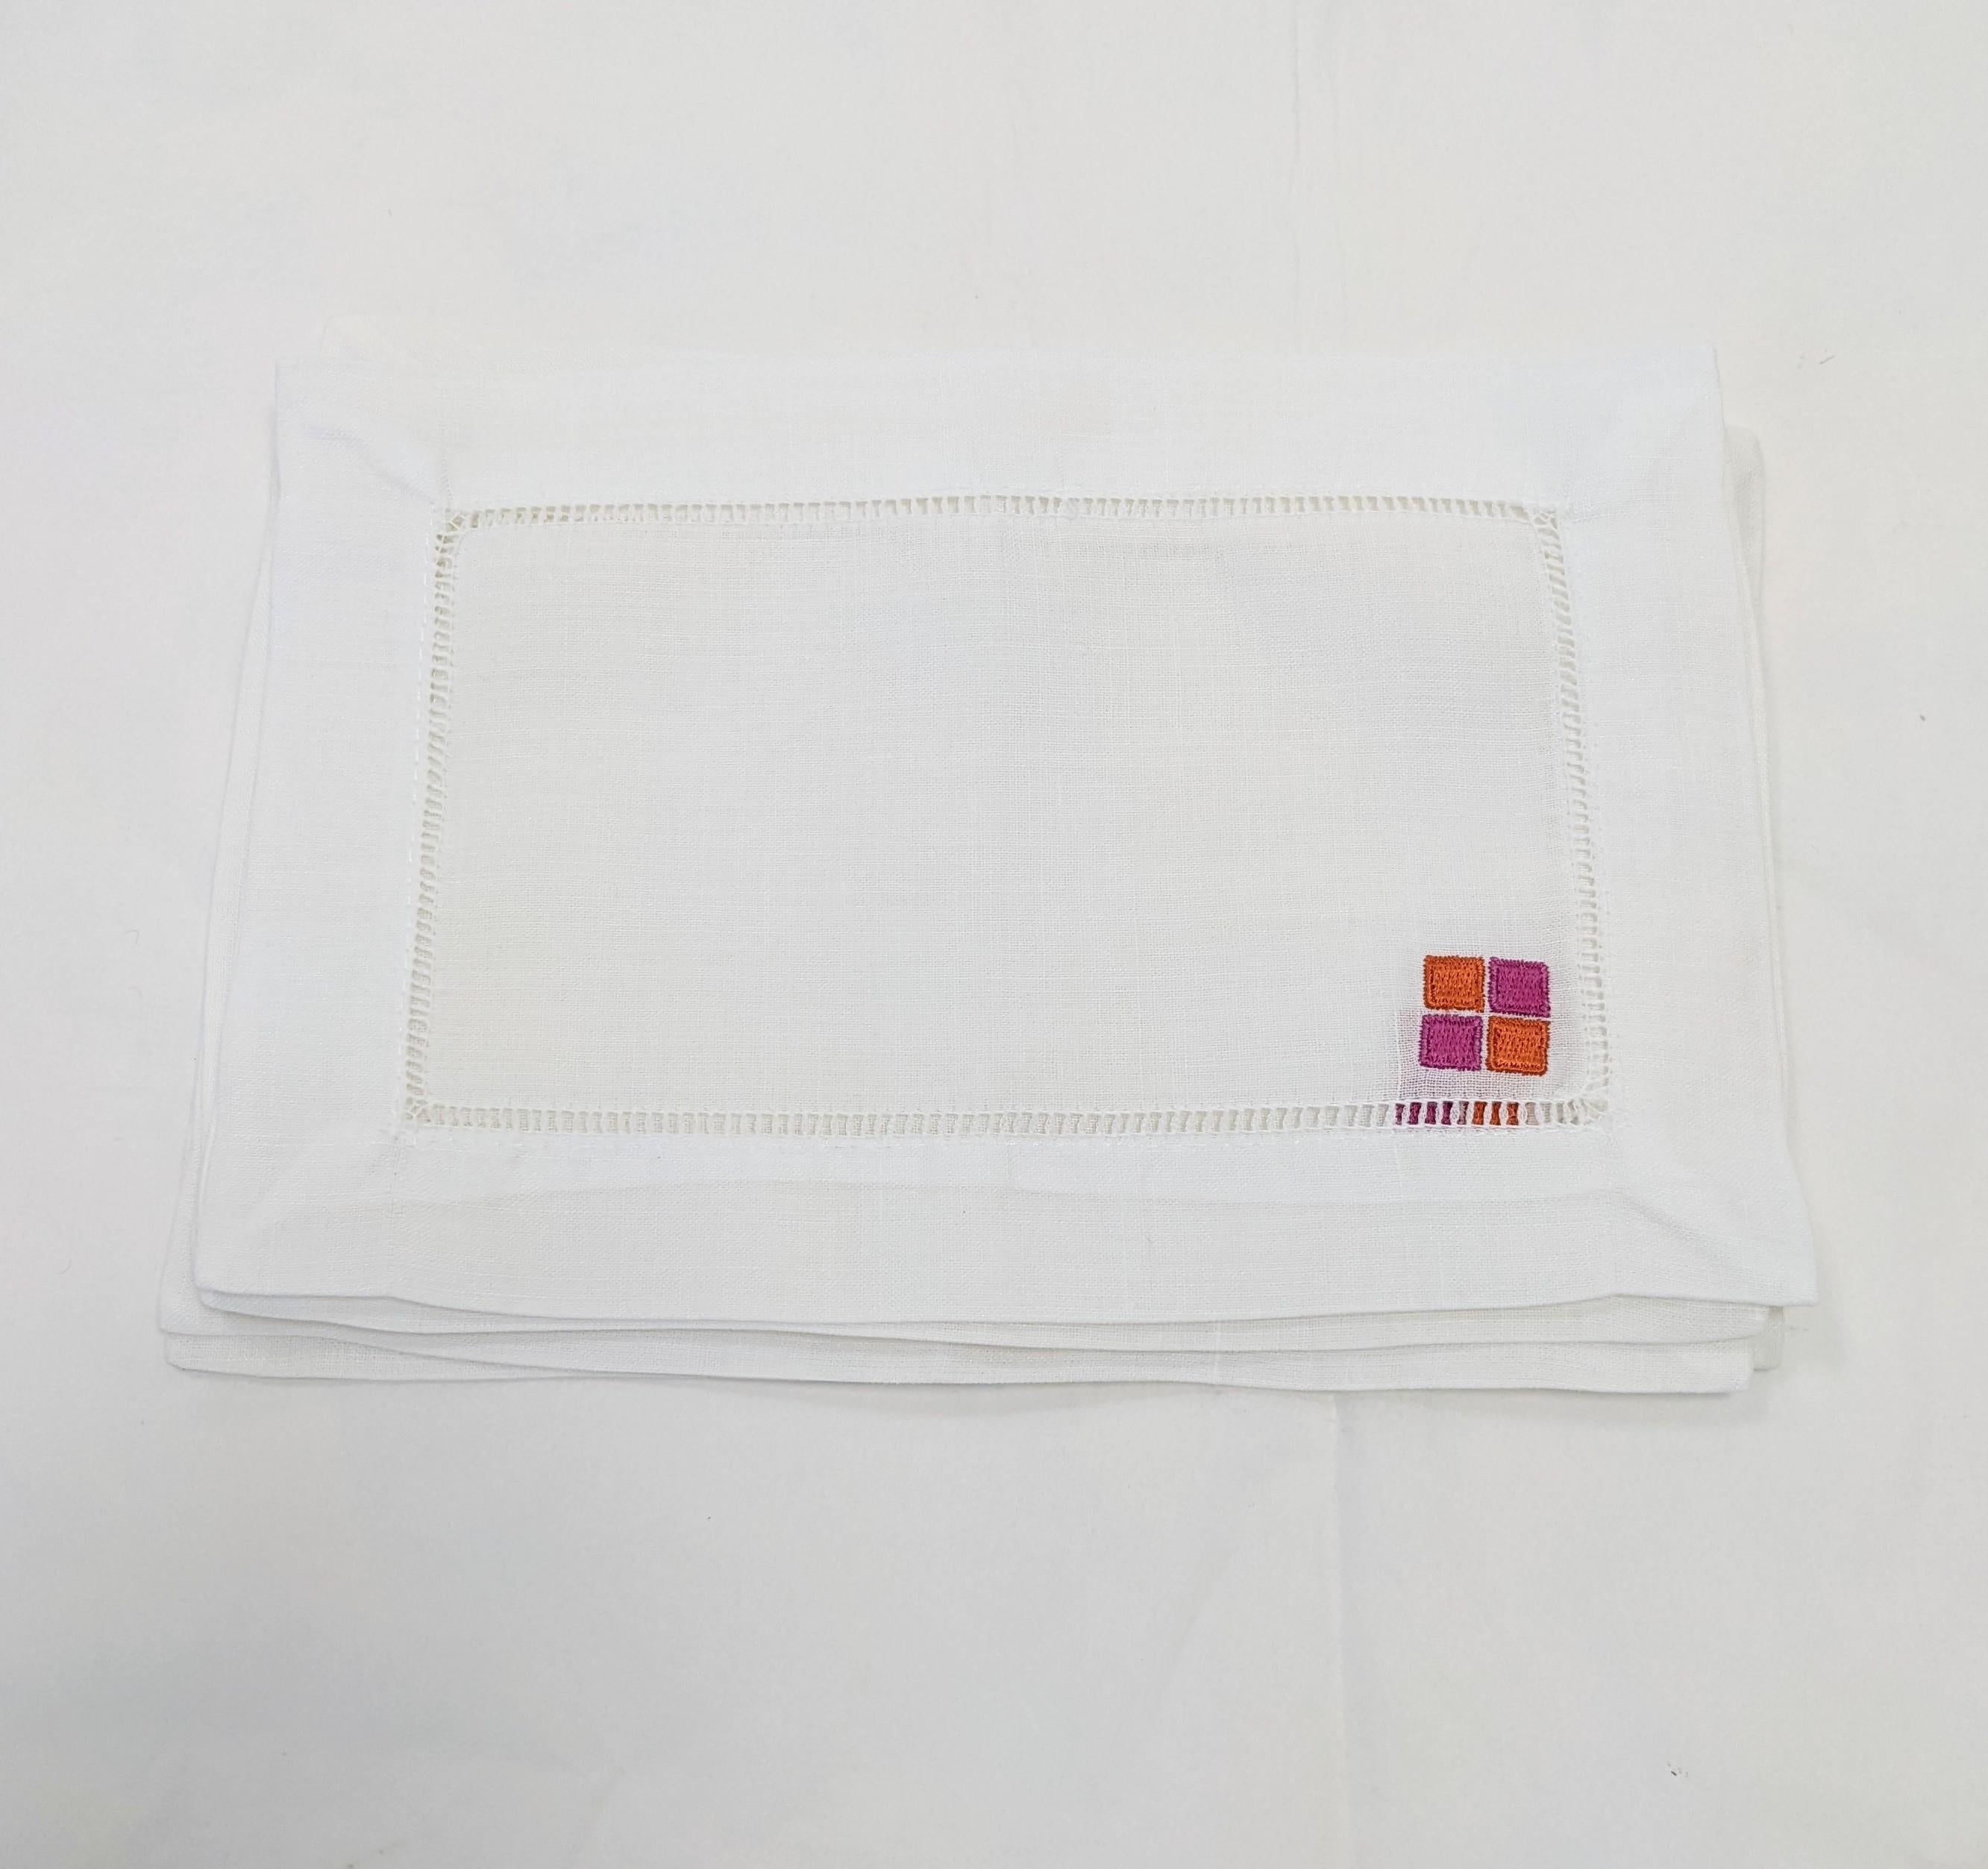  For the YSL collector and lover, an unusual set of six Yves Saint Laurent Rive Gauche cocktail napkins. Of crisp white linen with folded and hemstitched borders, embroidered with the Rive Gauche logo of four signature fuschia pink and orange